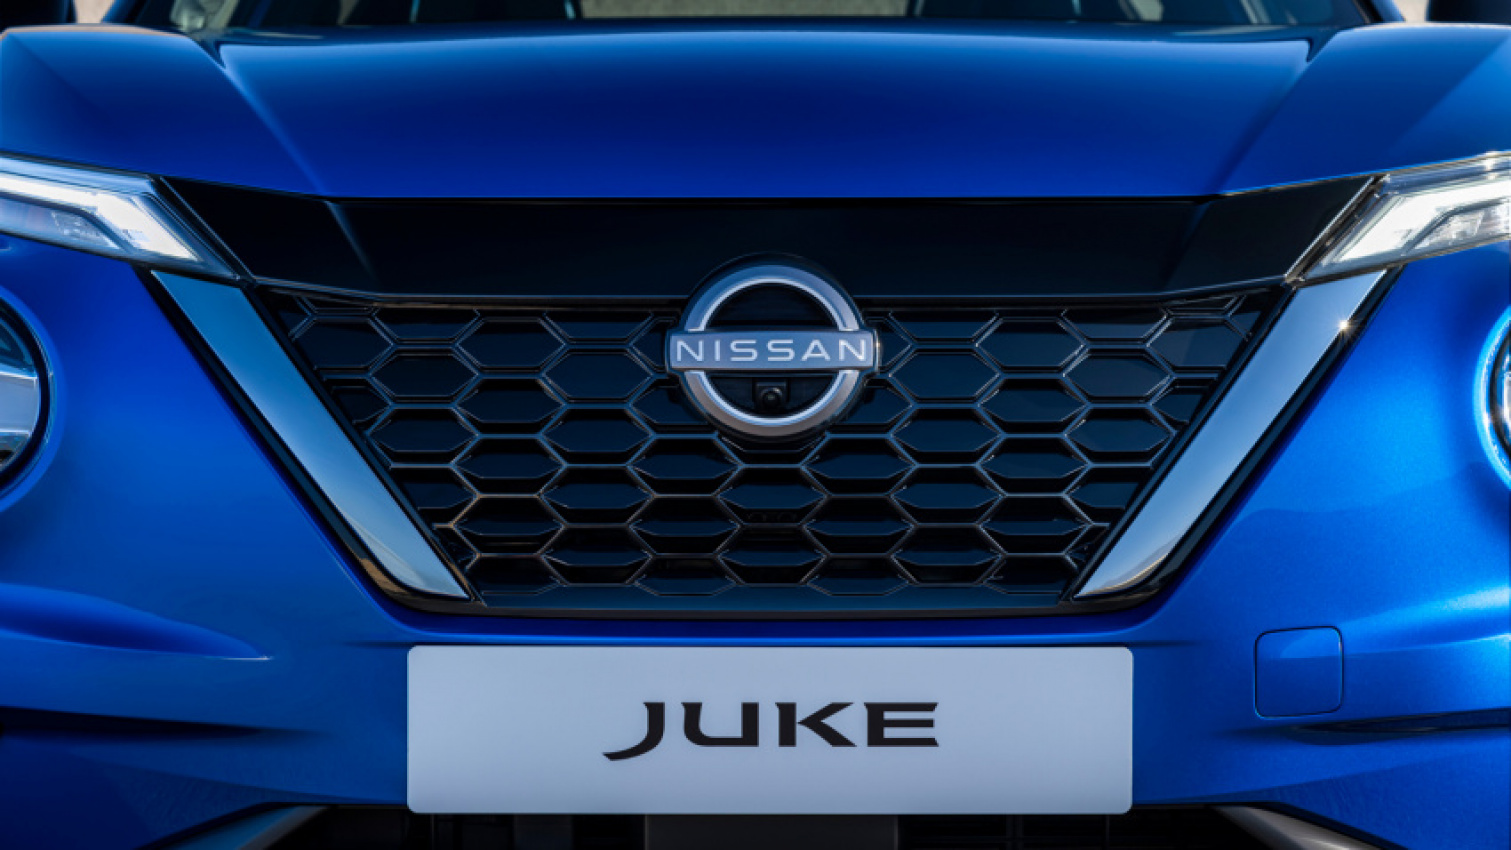 auto news, autos, cars, nissan, juke hybrid, nissan juke, nissan juke hybrid, 2022 nissan juke hybrid is perfect with today’s gas prices